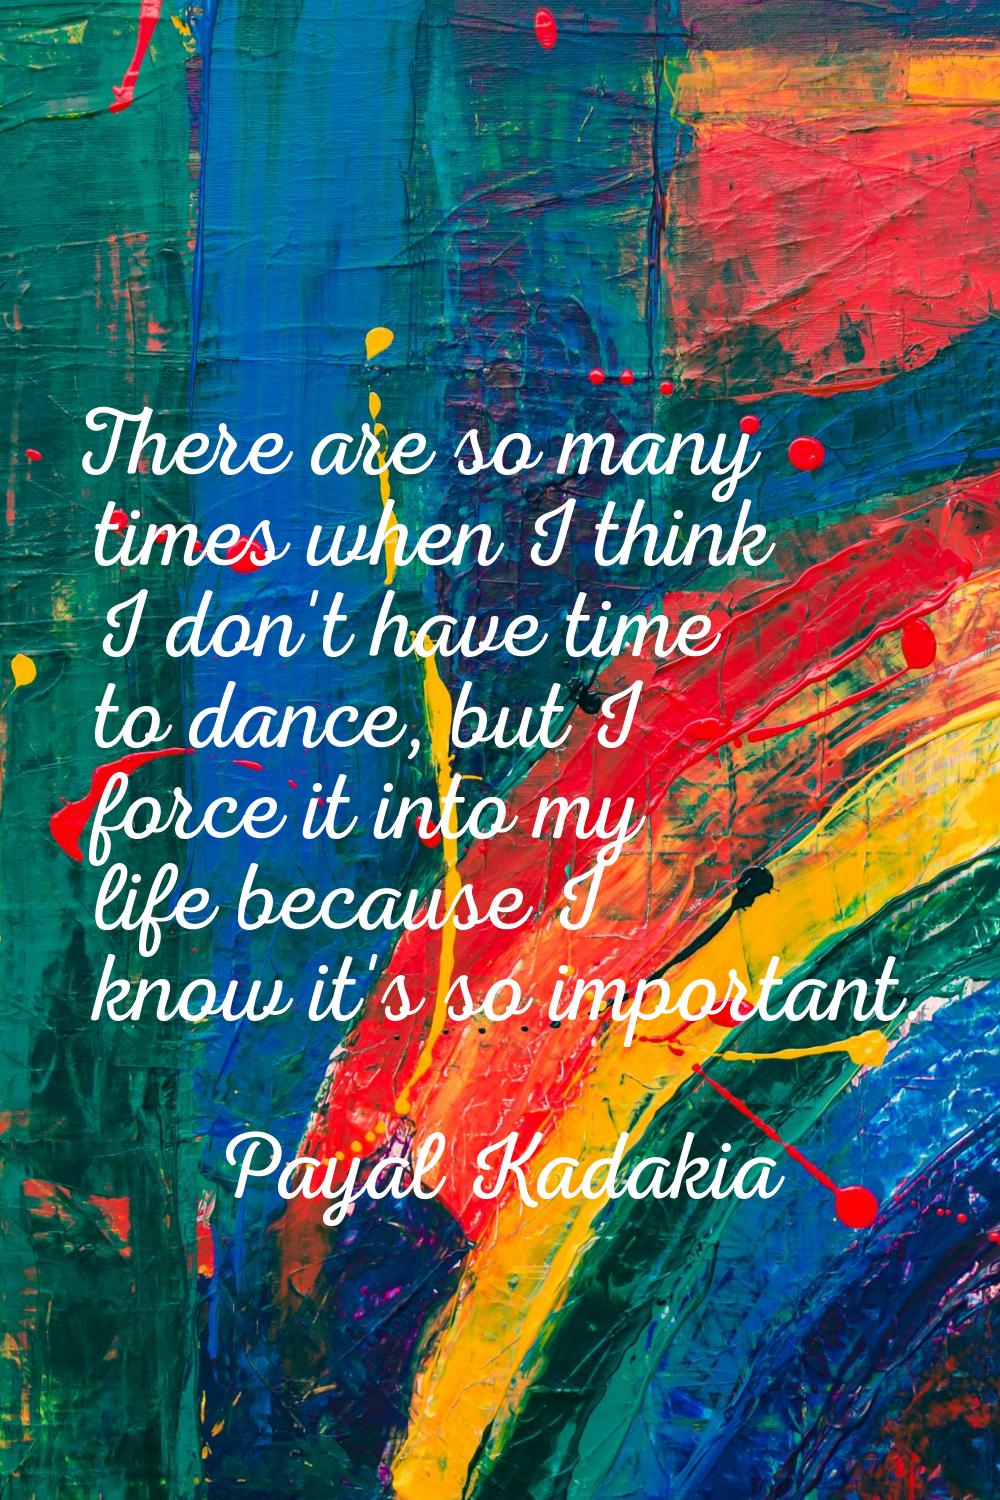 There are so many times when I think I don't have time to dance, but I force it into my life becaus